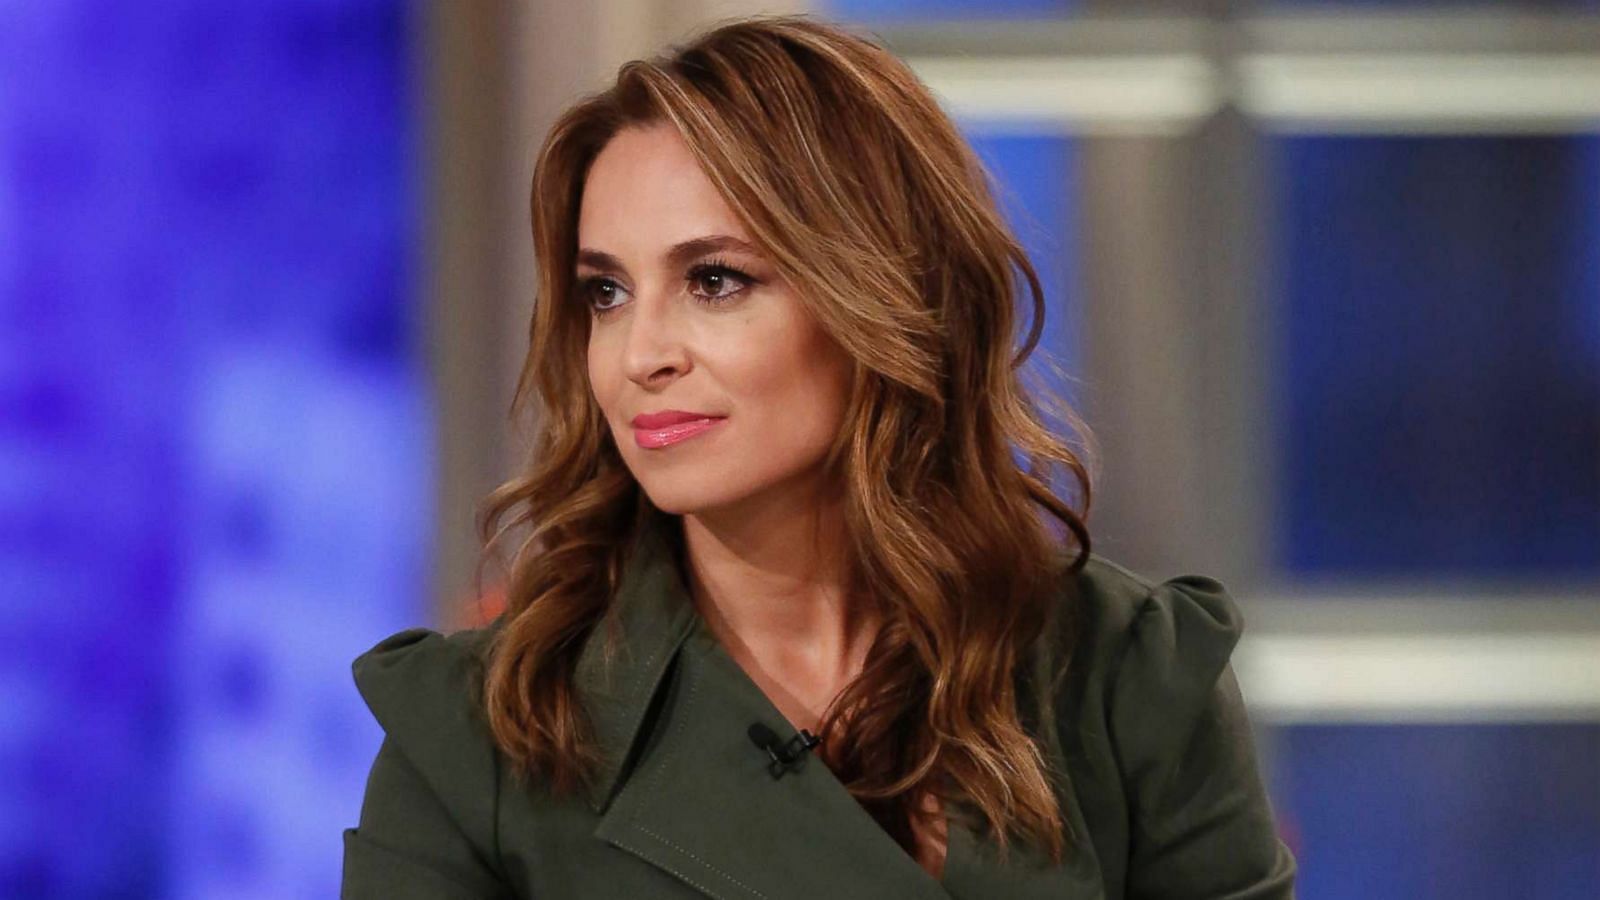 Jedediah Bila is best known as the anchor of &#039;Fox &amp; Friends&#039; (Image via Getty Images)